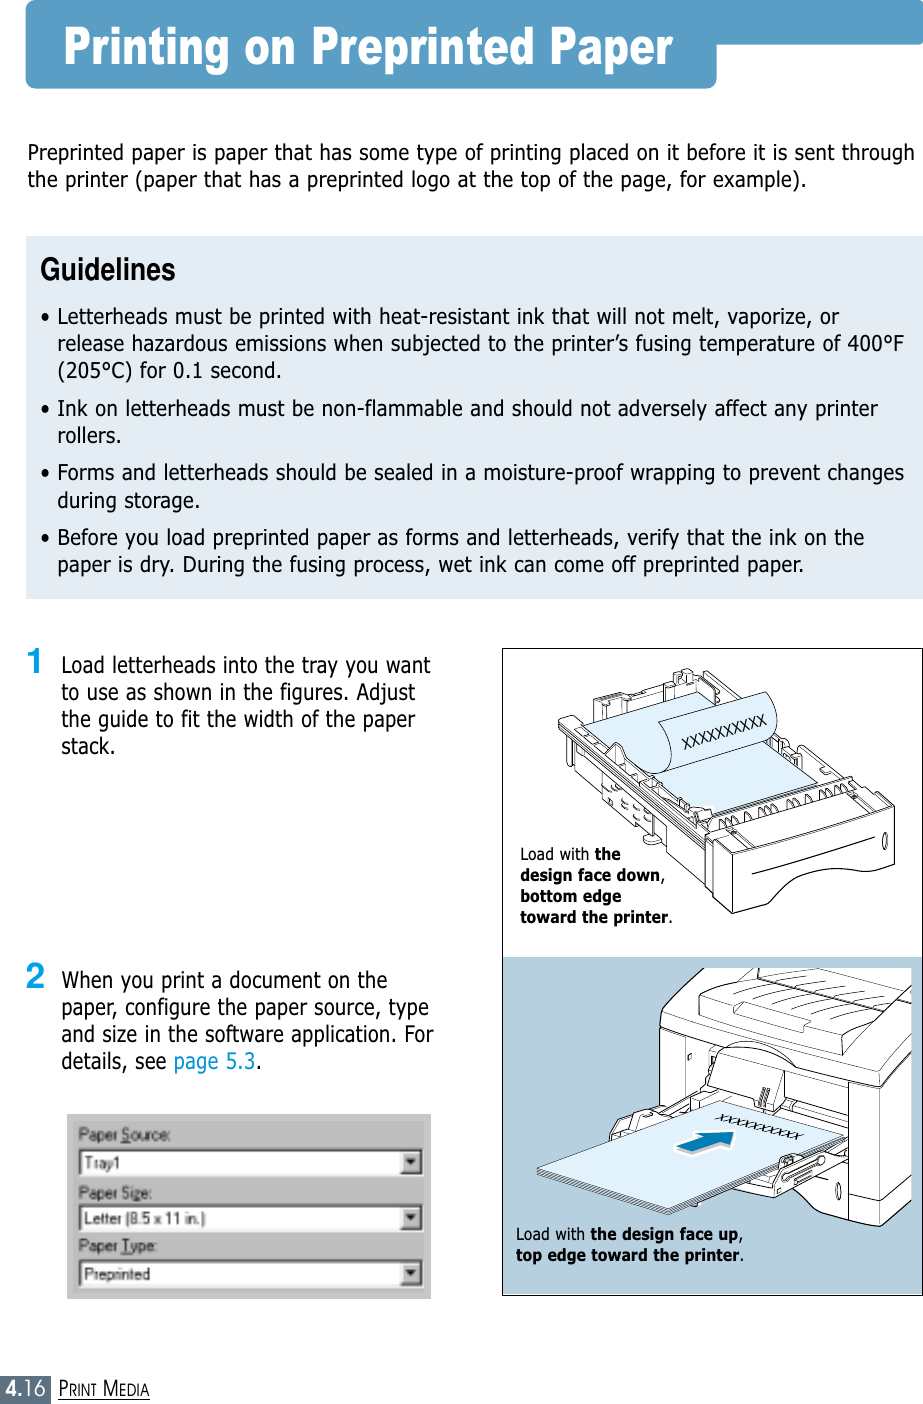 4.16PRINT MEDIAPrinting on Preprinted PaperXXXXXXXXXX1Load letterheads into the tray you wantto use as shown in the figures. Adjustthe guide to fit the width of the paperstack. 2When you print a document on thepaper, configure the paper source, typeand size in the software application. Fordetails, see page 5.3.Preprinted paper is paper that has some type of printing placed on it before it is sent throughthe printer (paper that has a preprinted logo at the top of the page, for example).Guidelines• Letterheads must be printed with heat-resistant ink that will not melt, vaporize, orrelease hazardous emissions when subjected to the printer’s fusing temperature of 400°F(205°C) for 0.1 second.• Ink on letterheads must be non-flammable and should not adversely affect any printerrollers.• Forms and letterheads should be sealed in a moisture-proof wrapping to prevent changesduring storage.• Before you load preprinted paper as forms and letterheads, verify that the ink on thepaper is dry. During the fusing process, wet ink can come off preprinted paper.Load with the design face down,bottom edge toward the printer.Load with the design face up, top edge toward the printer.